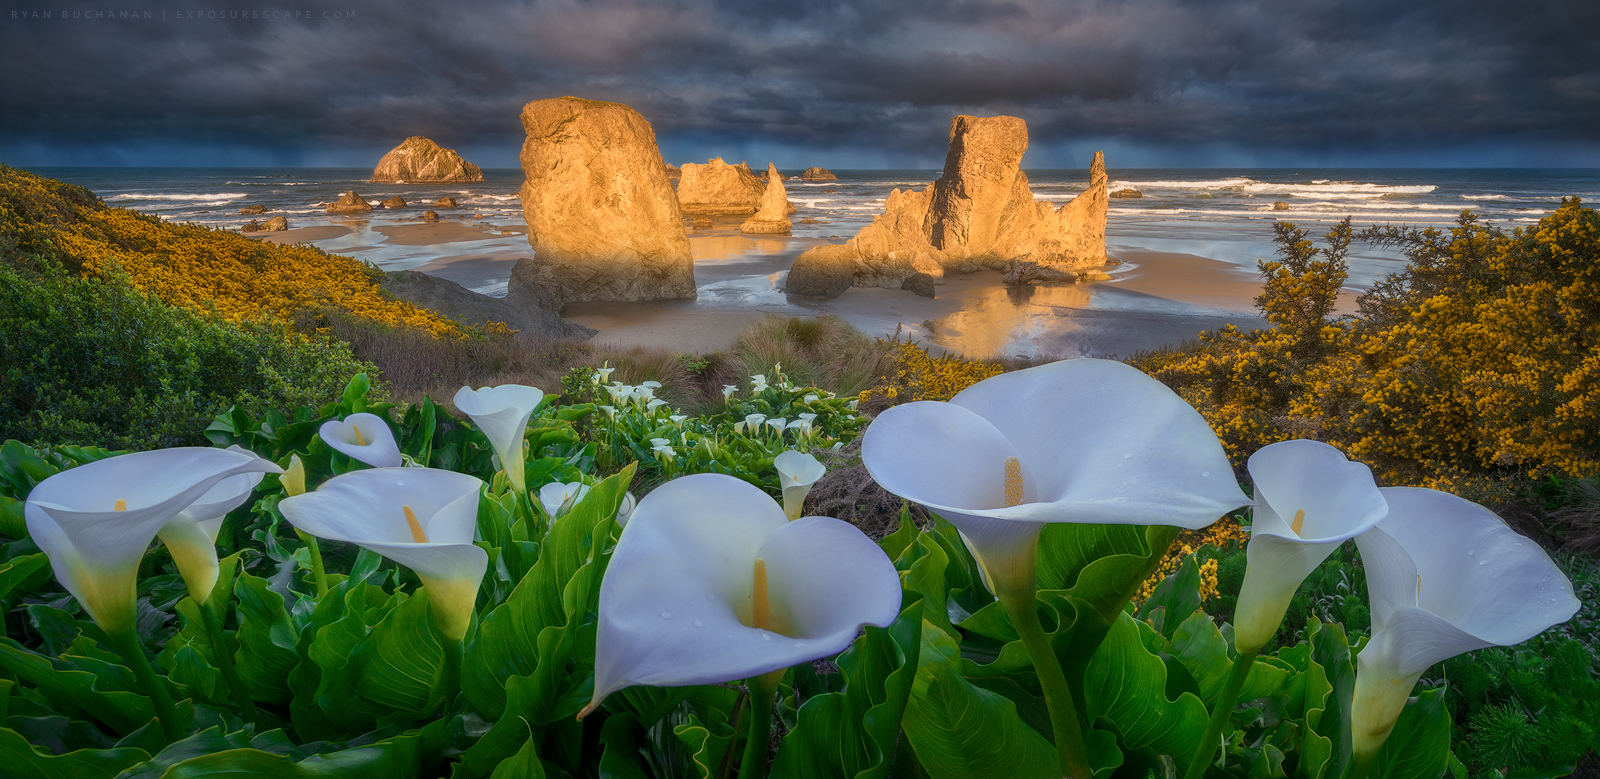 A nice patch of calla lilies overlooking the unique seastacks of Bandon Beach.